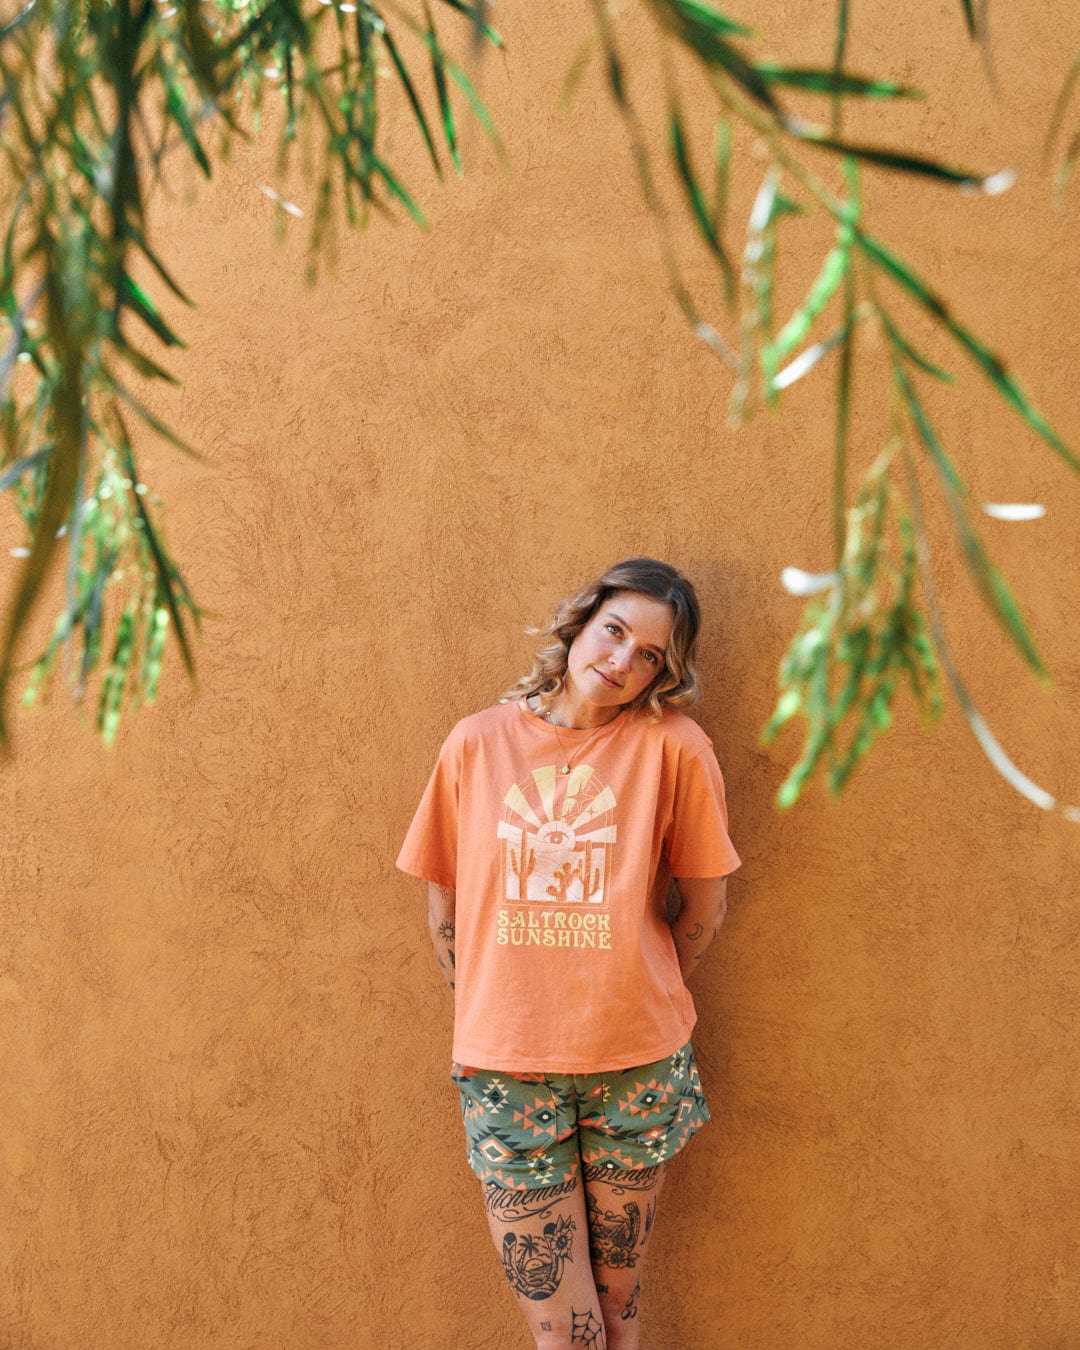 A person leans against an orange wall, wearing an orange t-shirt with Saltrock branding and patterned shorts. Featuring a boxy design with relaxed drop shoulders, the outfit blends seamlessly into the mystic desert sunset backdrop. Green foliage hangs in the foreground.
